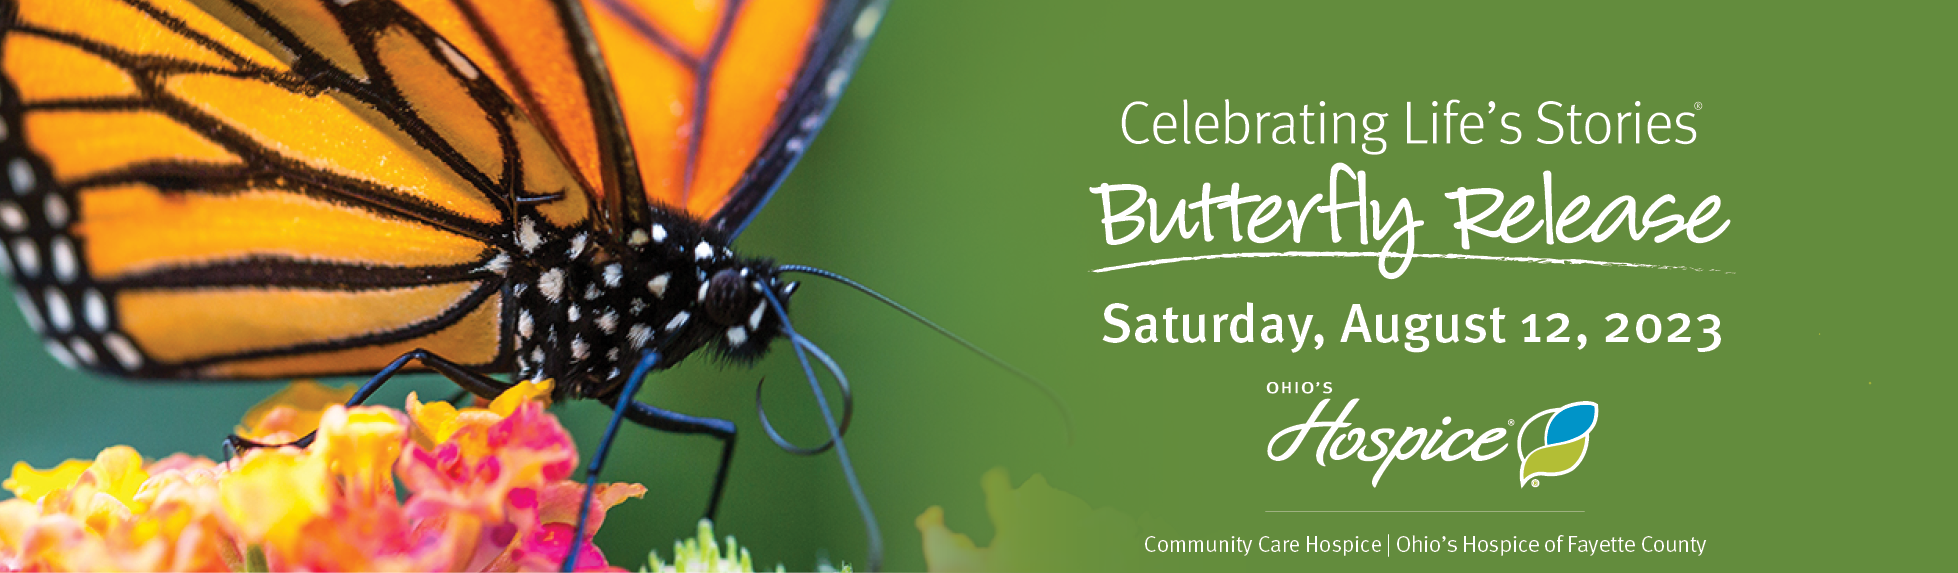 Community Care Hospice and Ohio's Hospice of Fayette County Celebrating Life's Stories 2023 Butterfly Release Saturday, August 12, 2023